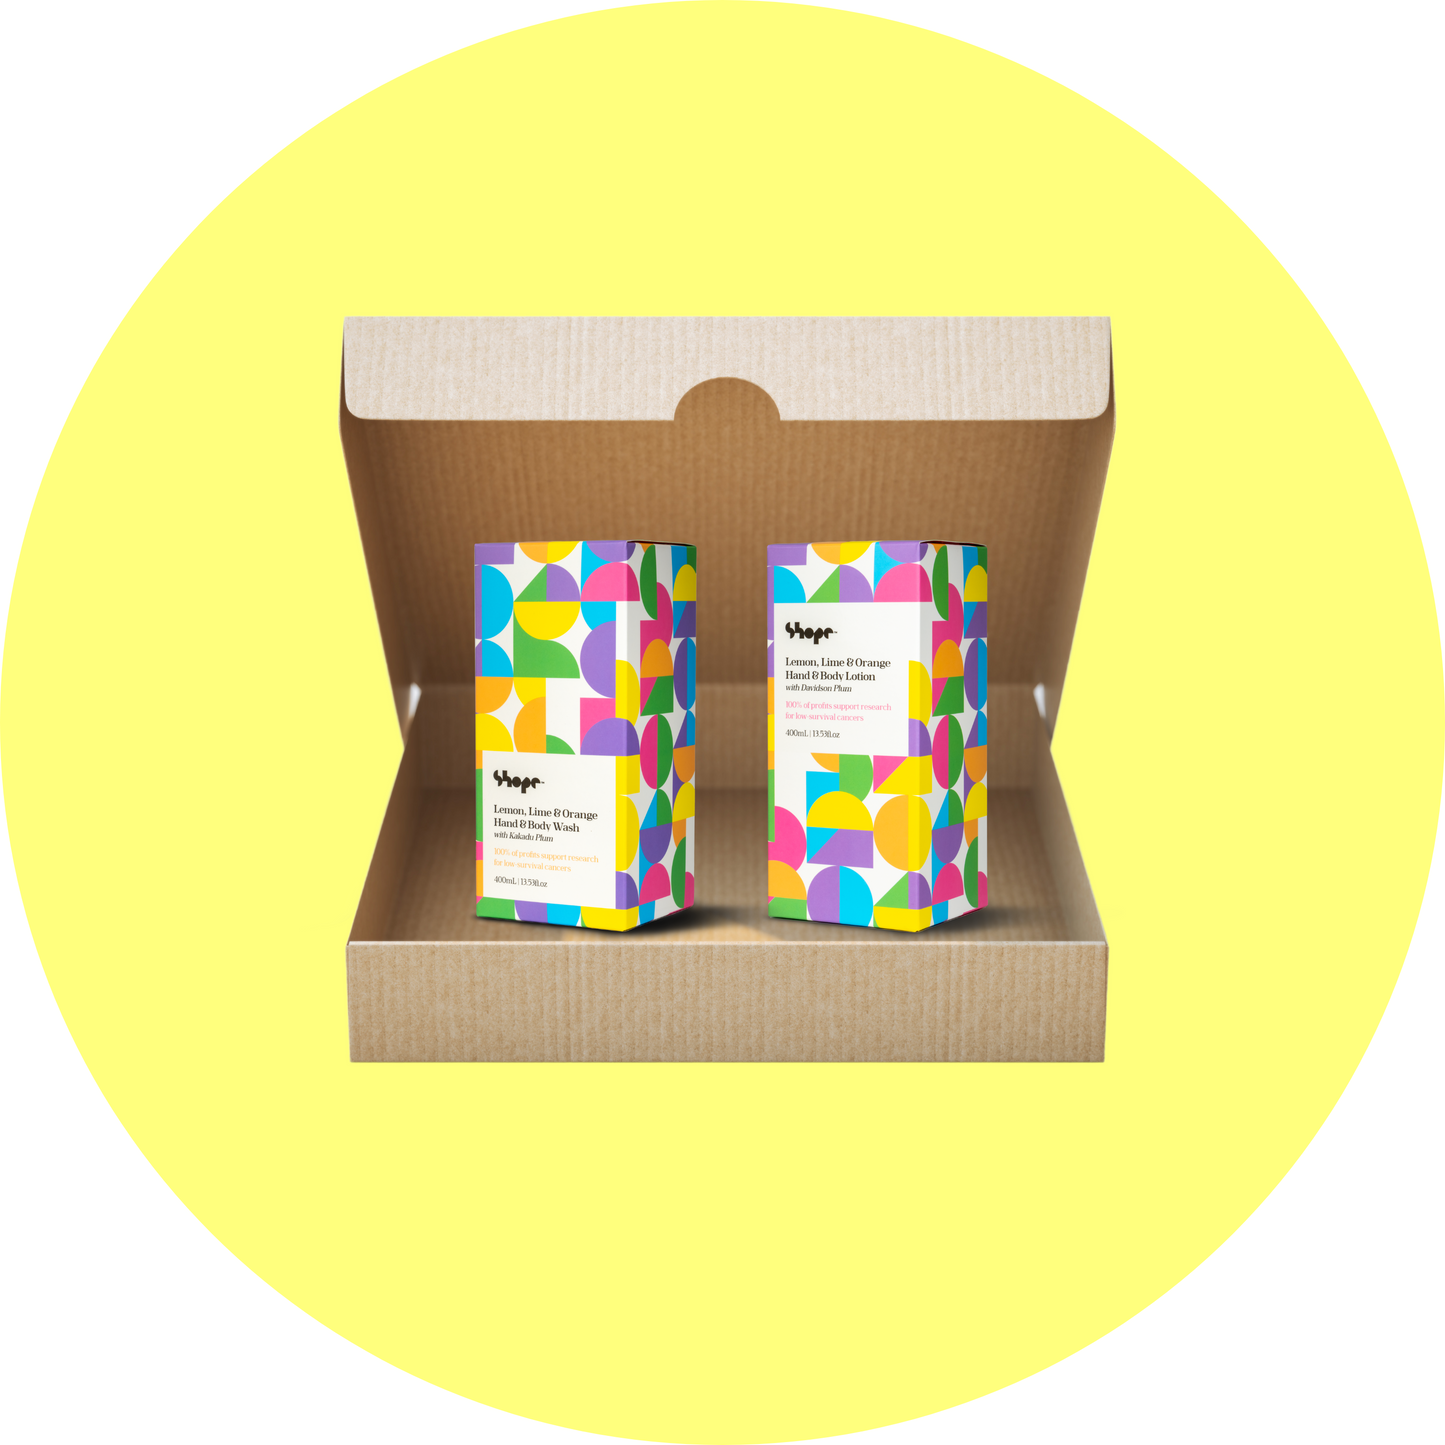 Boxed SHOPE lemon lime and orange hand and body wash and hand and body lotion, inside brown shipping box with yellow circle background.